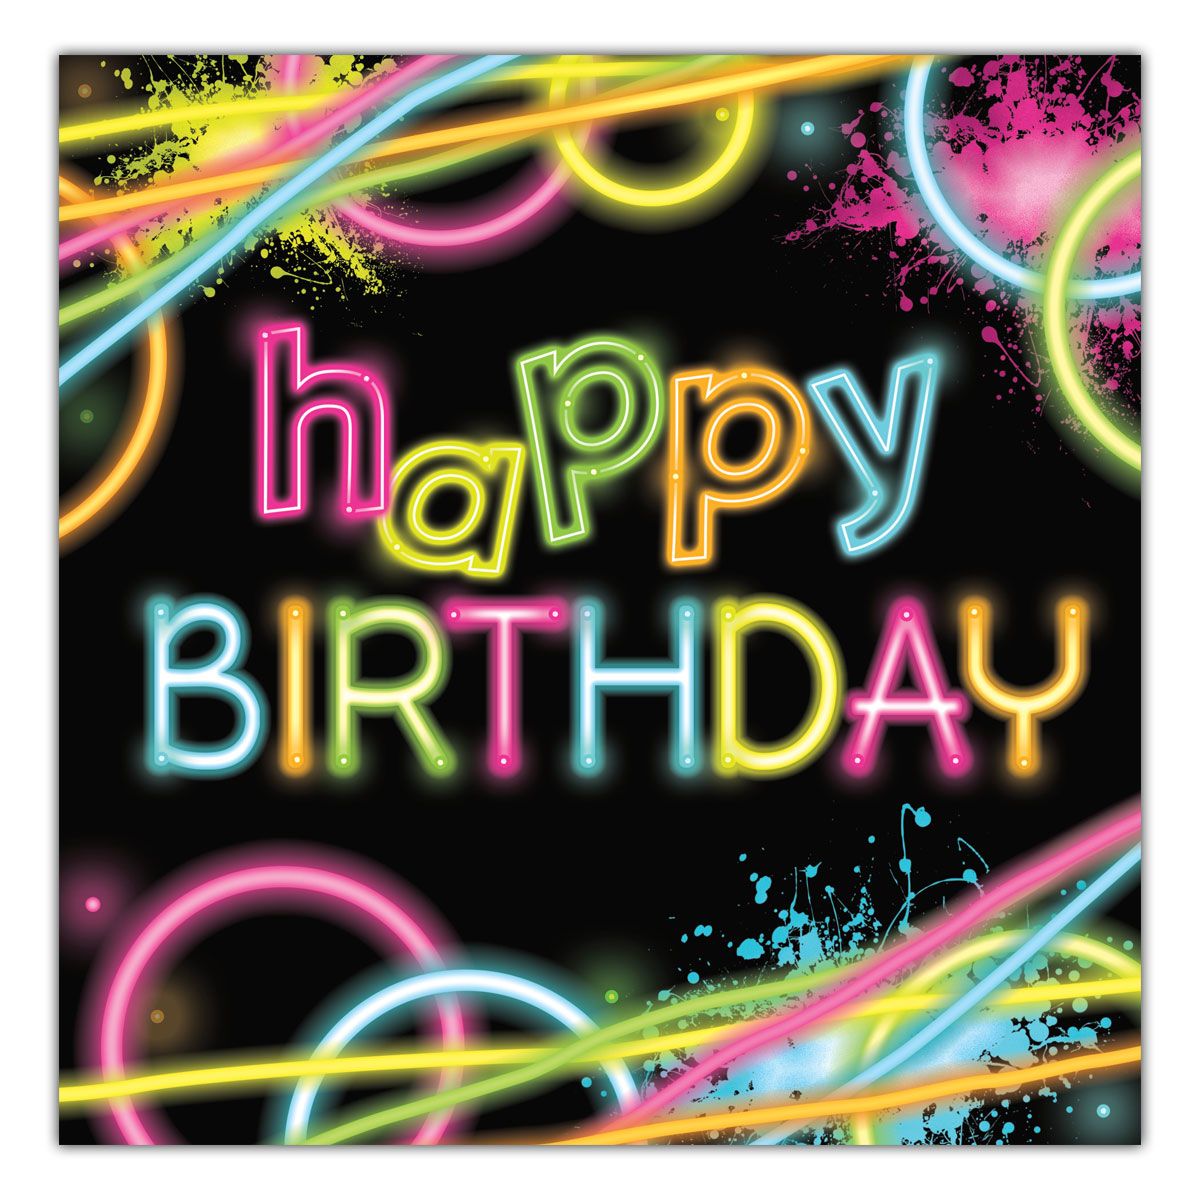 Glow Party Birthday Lunch Napkins - 16 Per Unit by Windy City Novelties